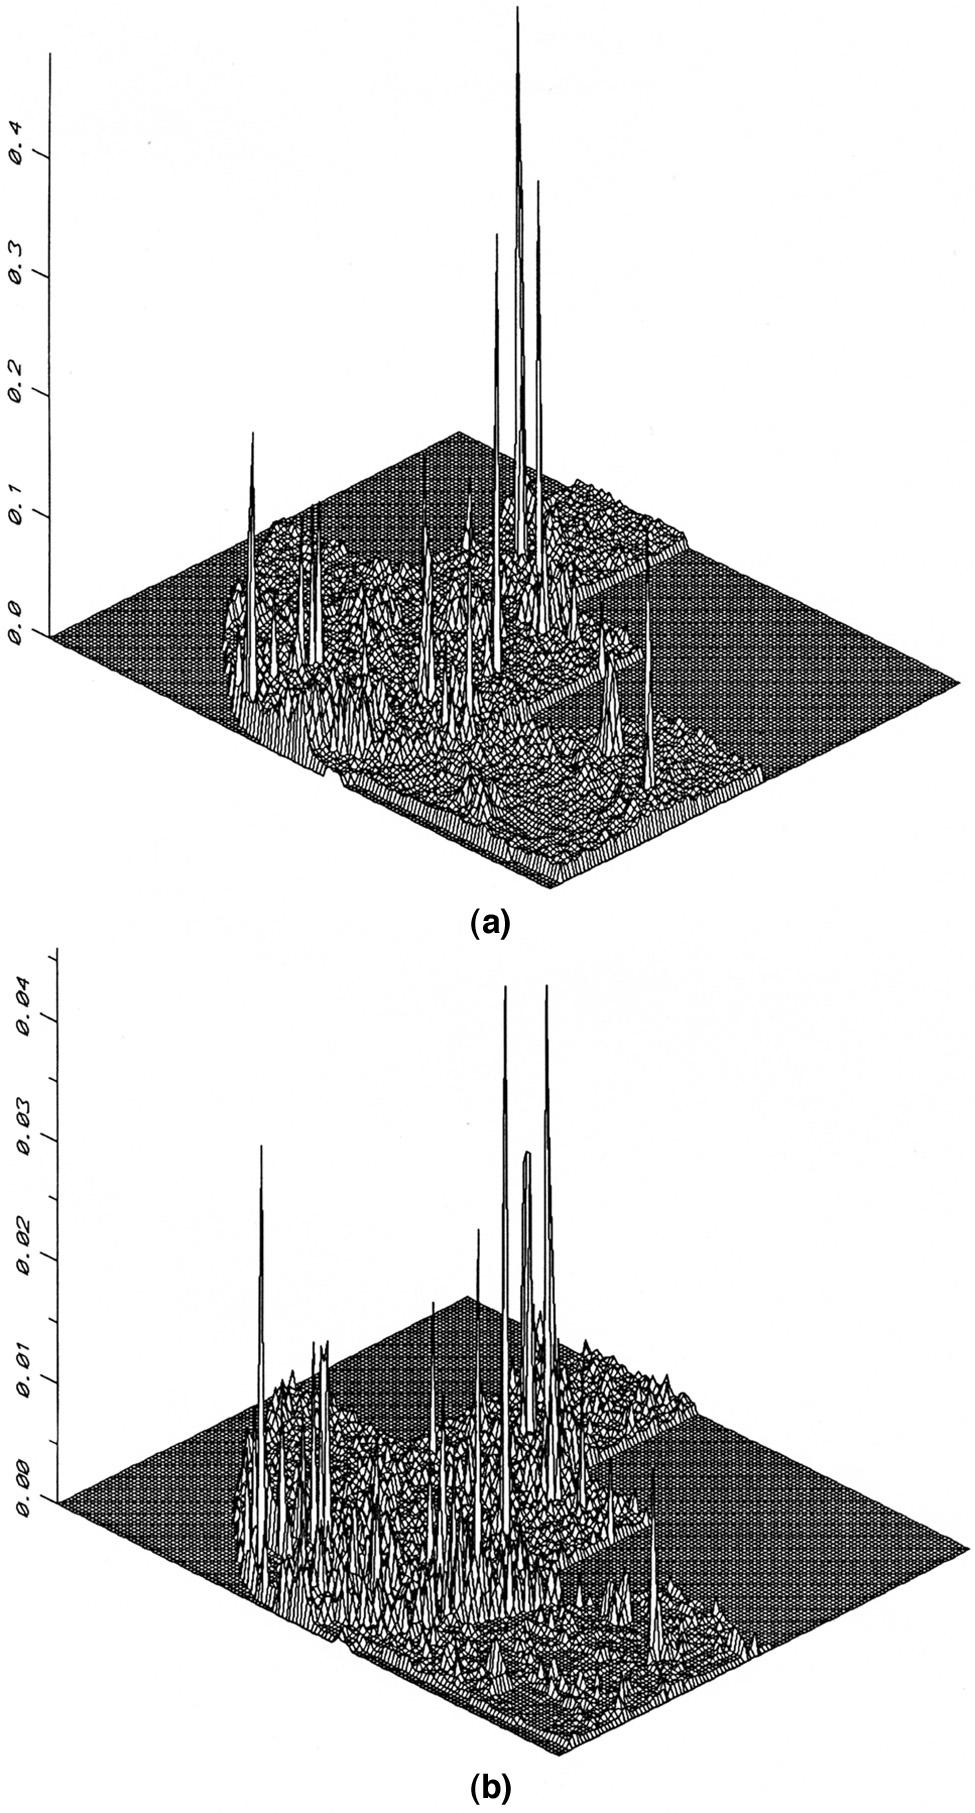 Figure 2. Surface plot of standard deviations in (a) grid elevation (vertical exaggeration 3500) and (b) slope (vertical exaggeration 35000) for the ground truth DEM.